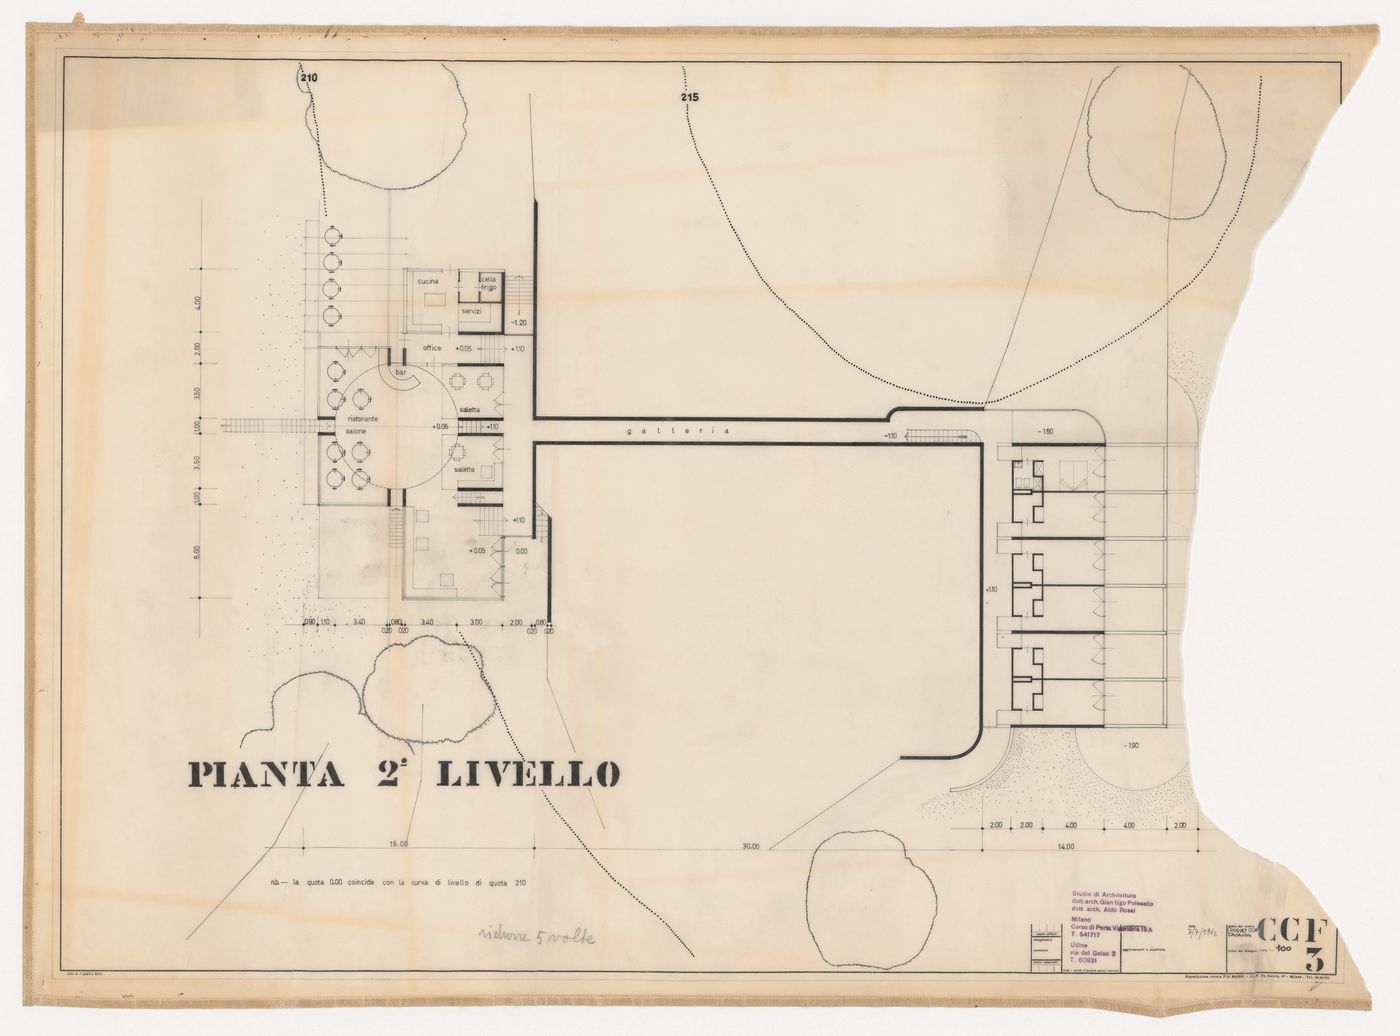 Floor plan for Country Club, Fagagna, Italy